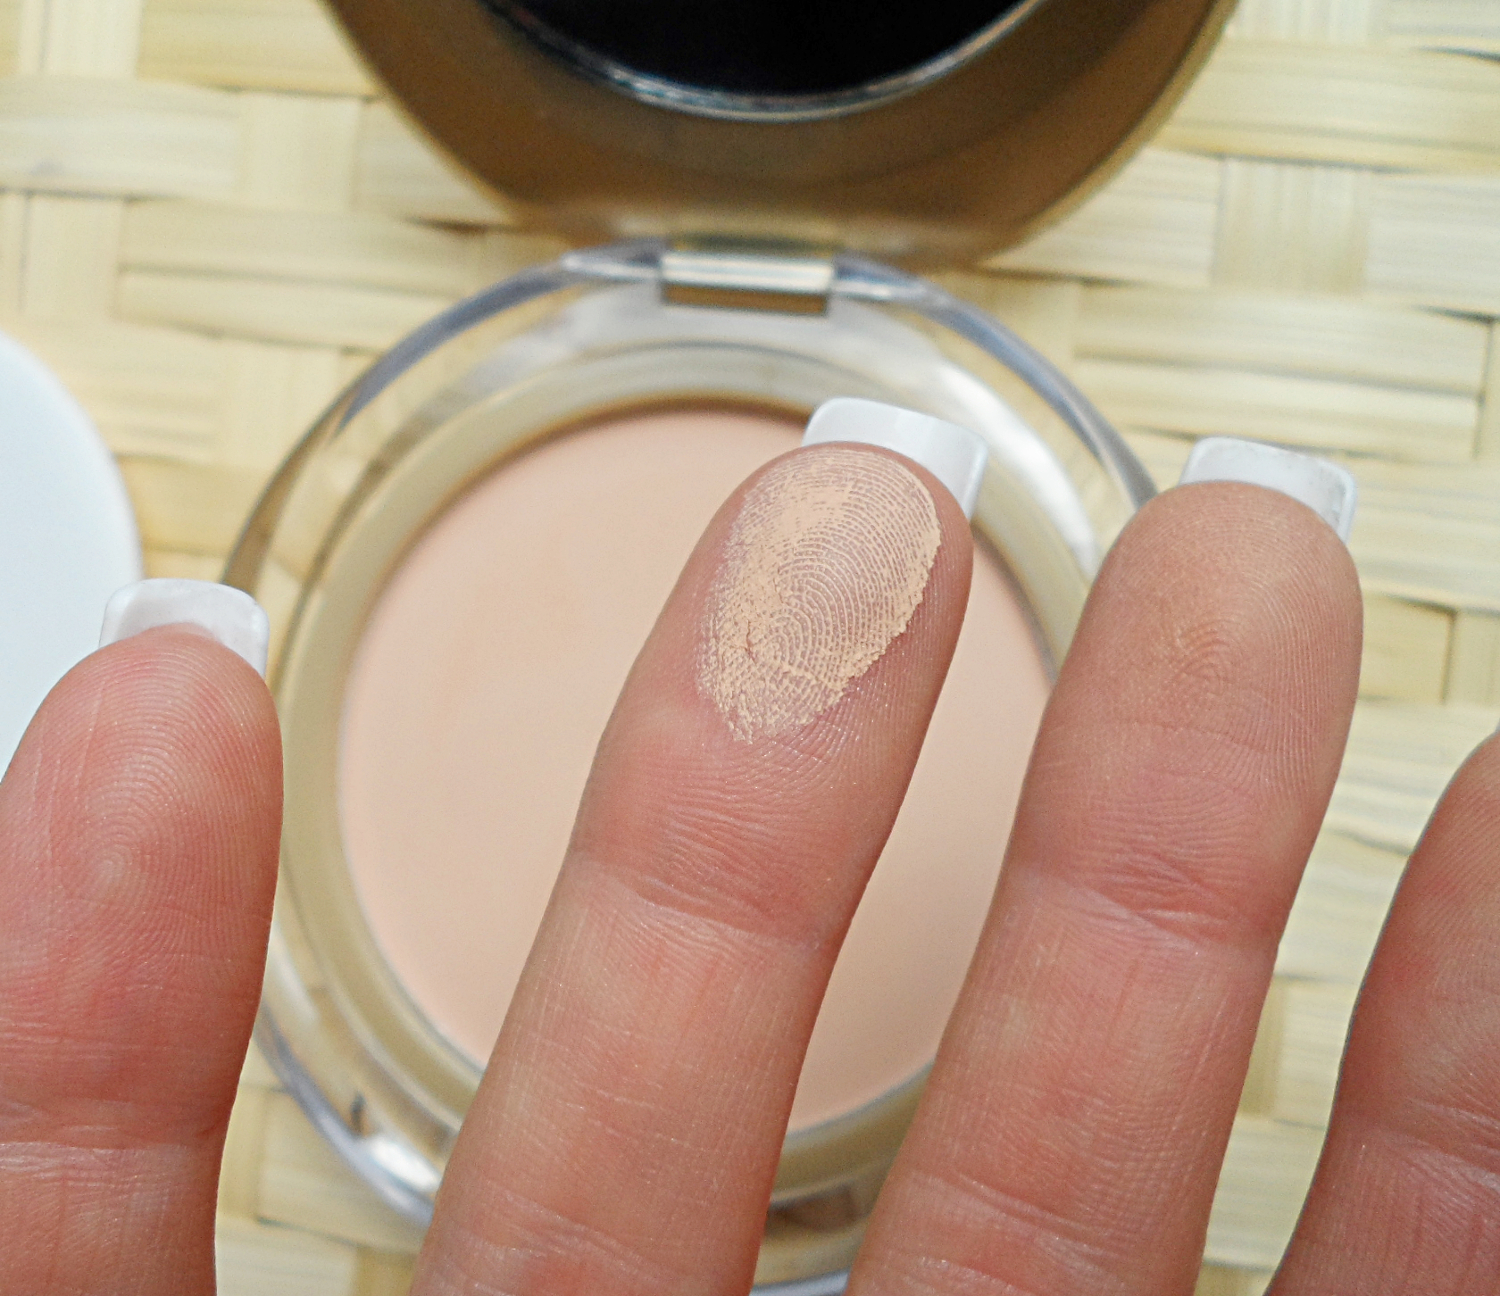 pupa powder blogger review and swatch